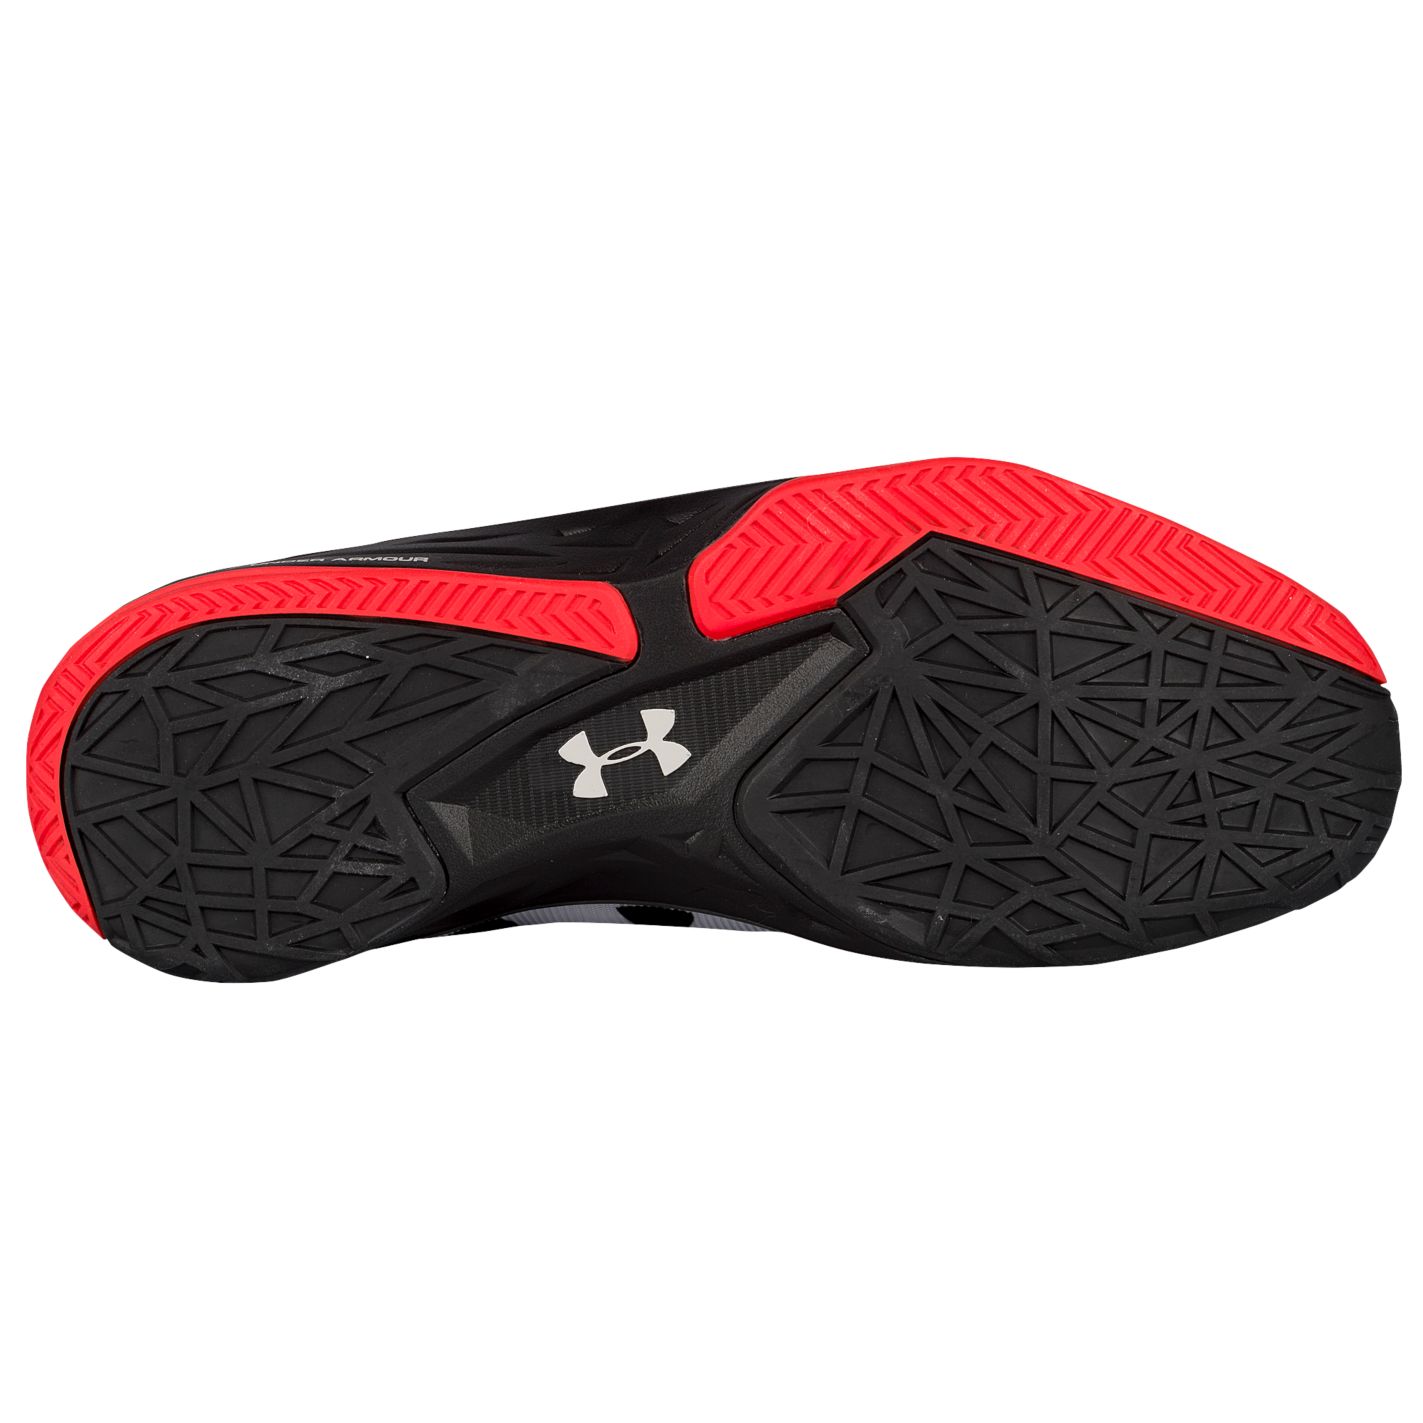 The Under Armour Fire Shot is Available Now 6